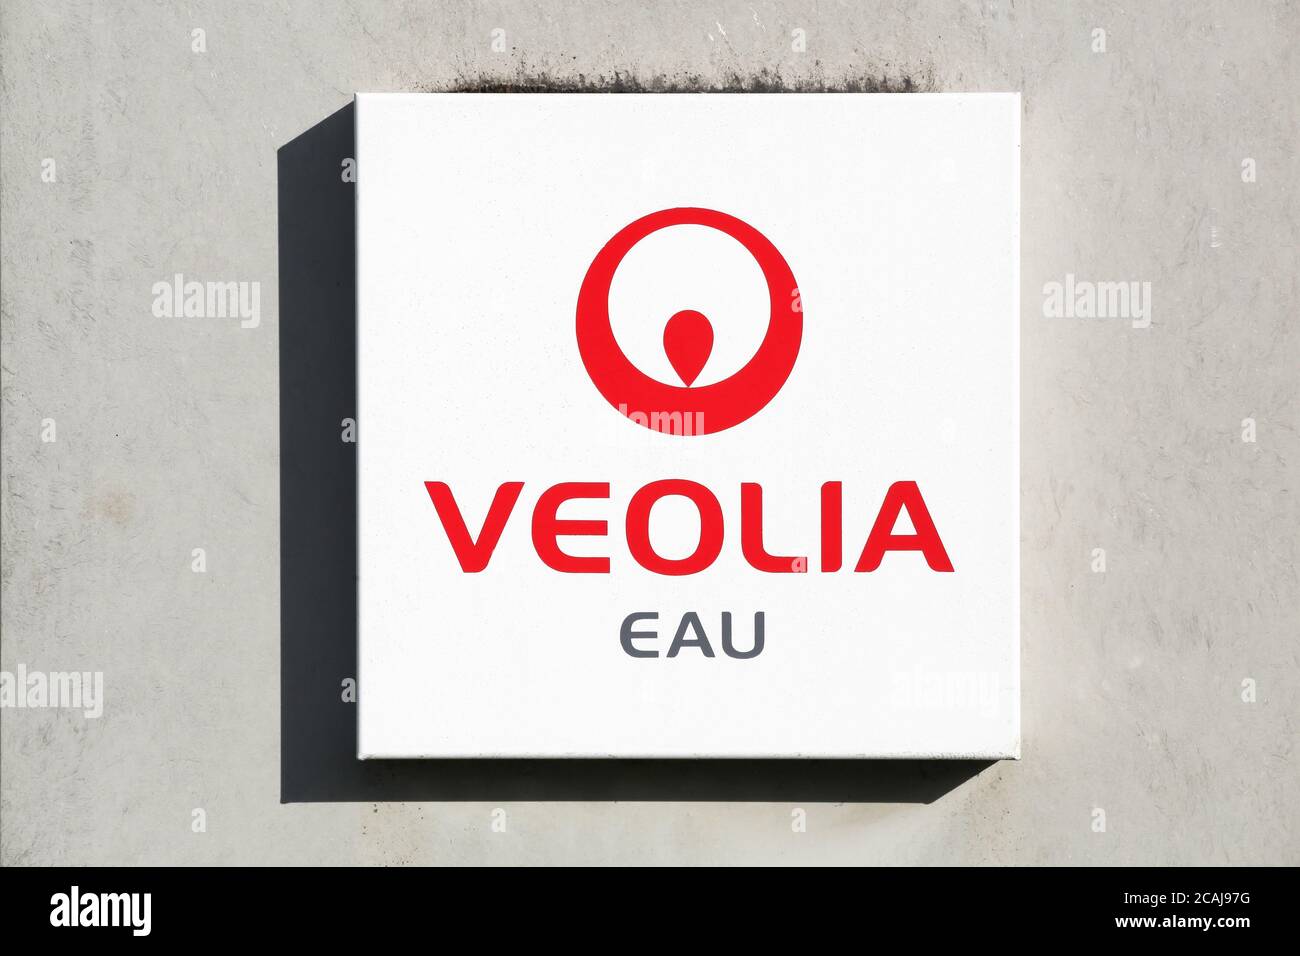 Macon, France - Mars 15, 2020: Veolia water logo on a wall. Veolia Water is the water division of the French company Veolia Environnement Stock Photo